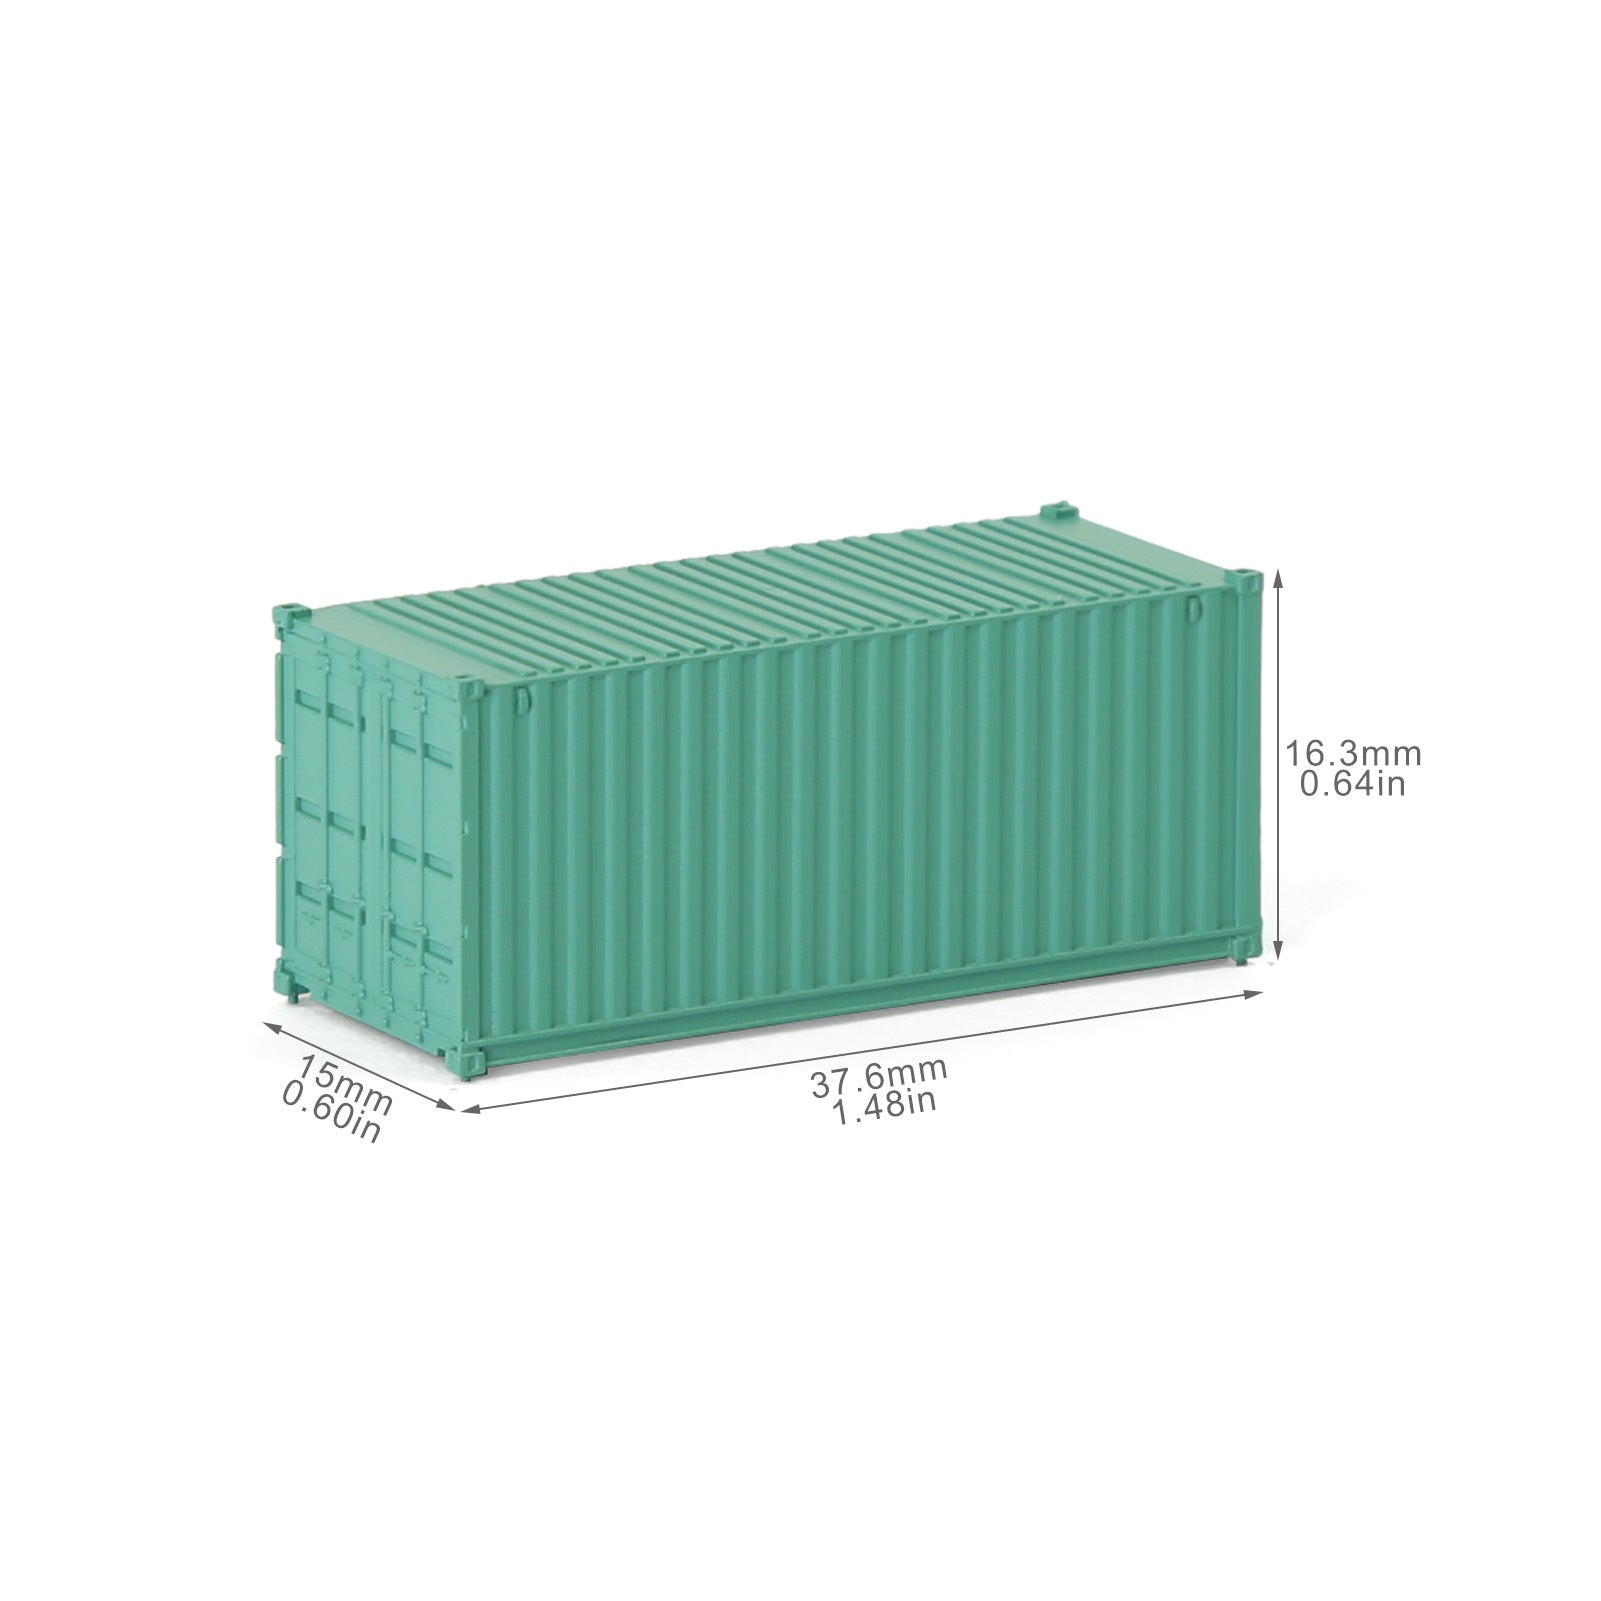 C15007 9pcs N Scale 1:160 20ft Pure Color Shipping Container